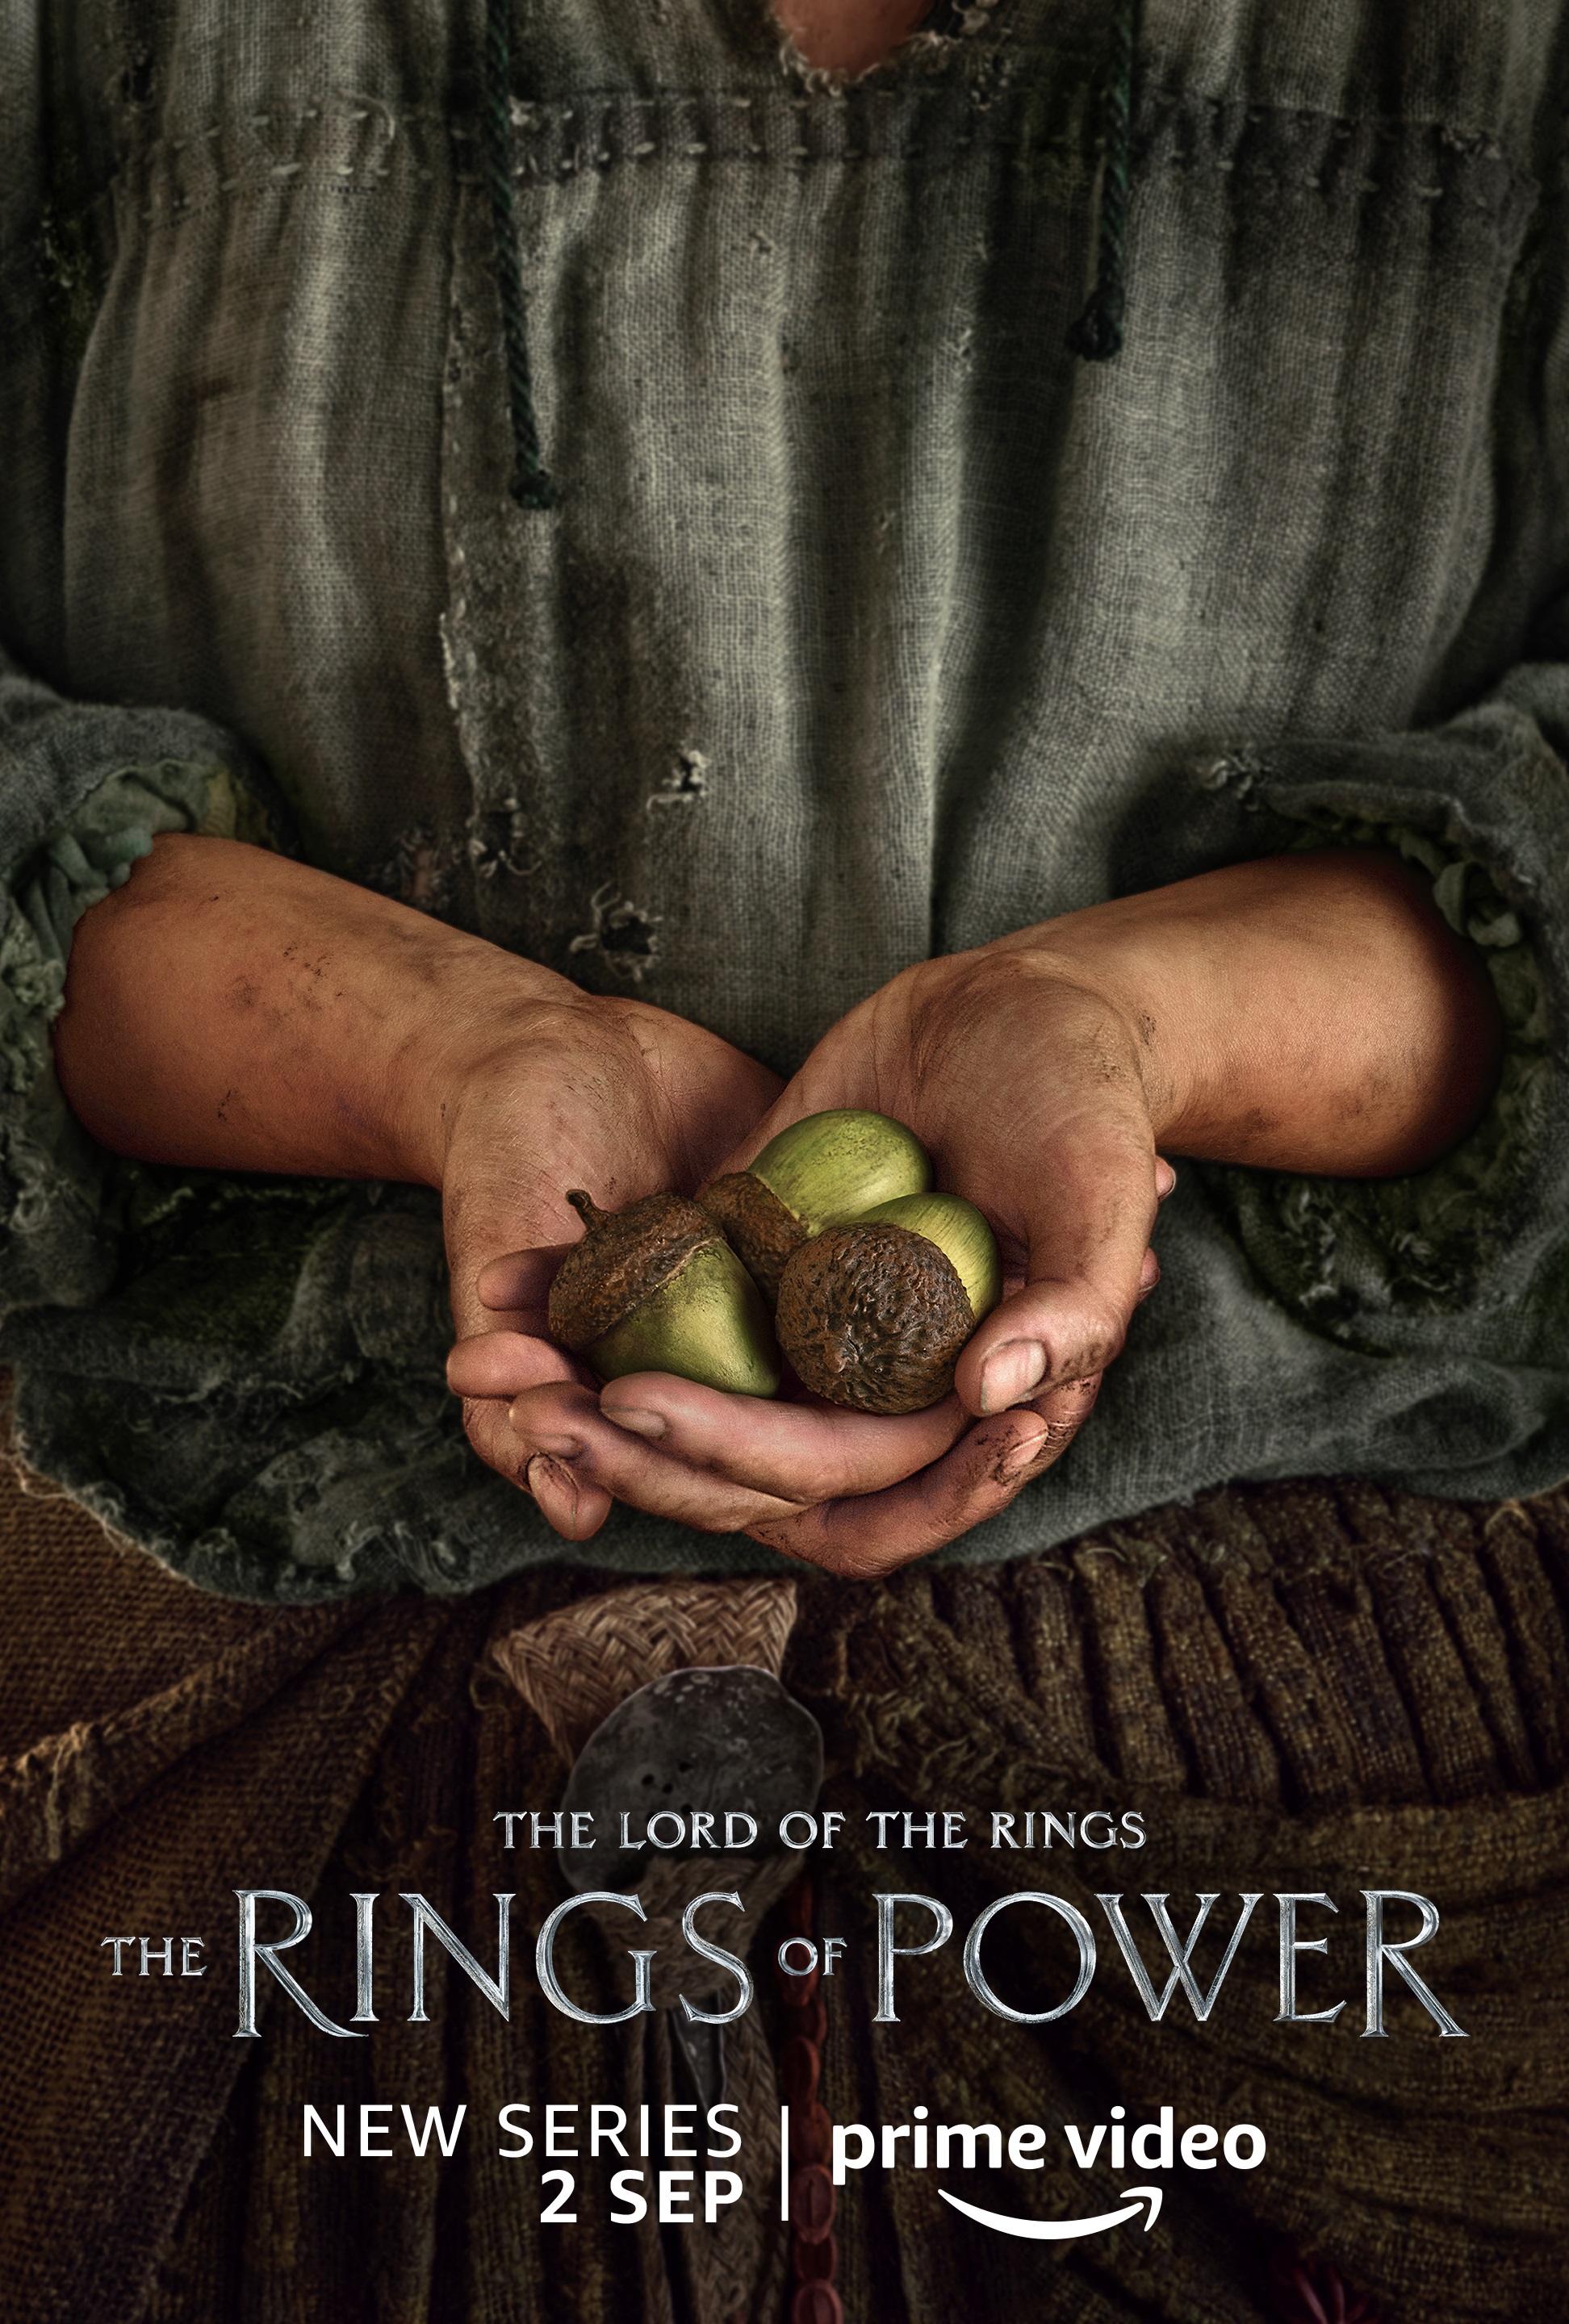 A person holding some acorns character poster for Lord of the Rings: The Rings of Power